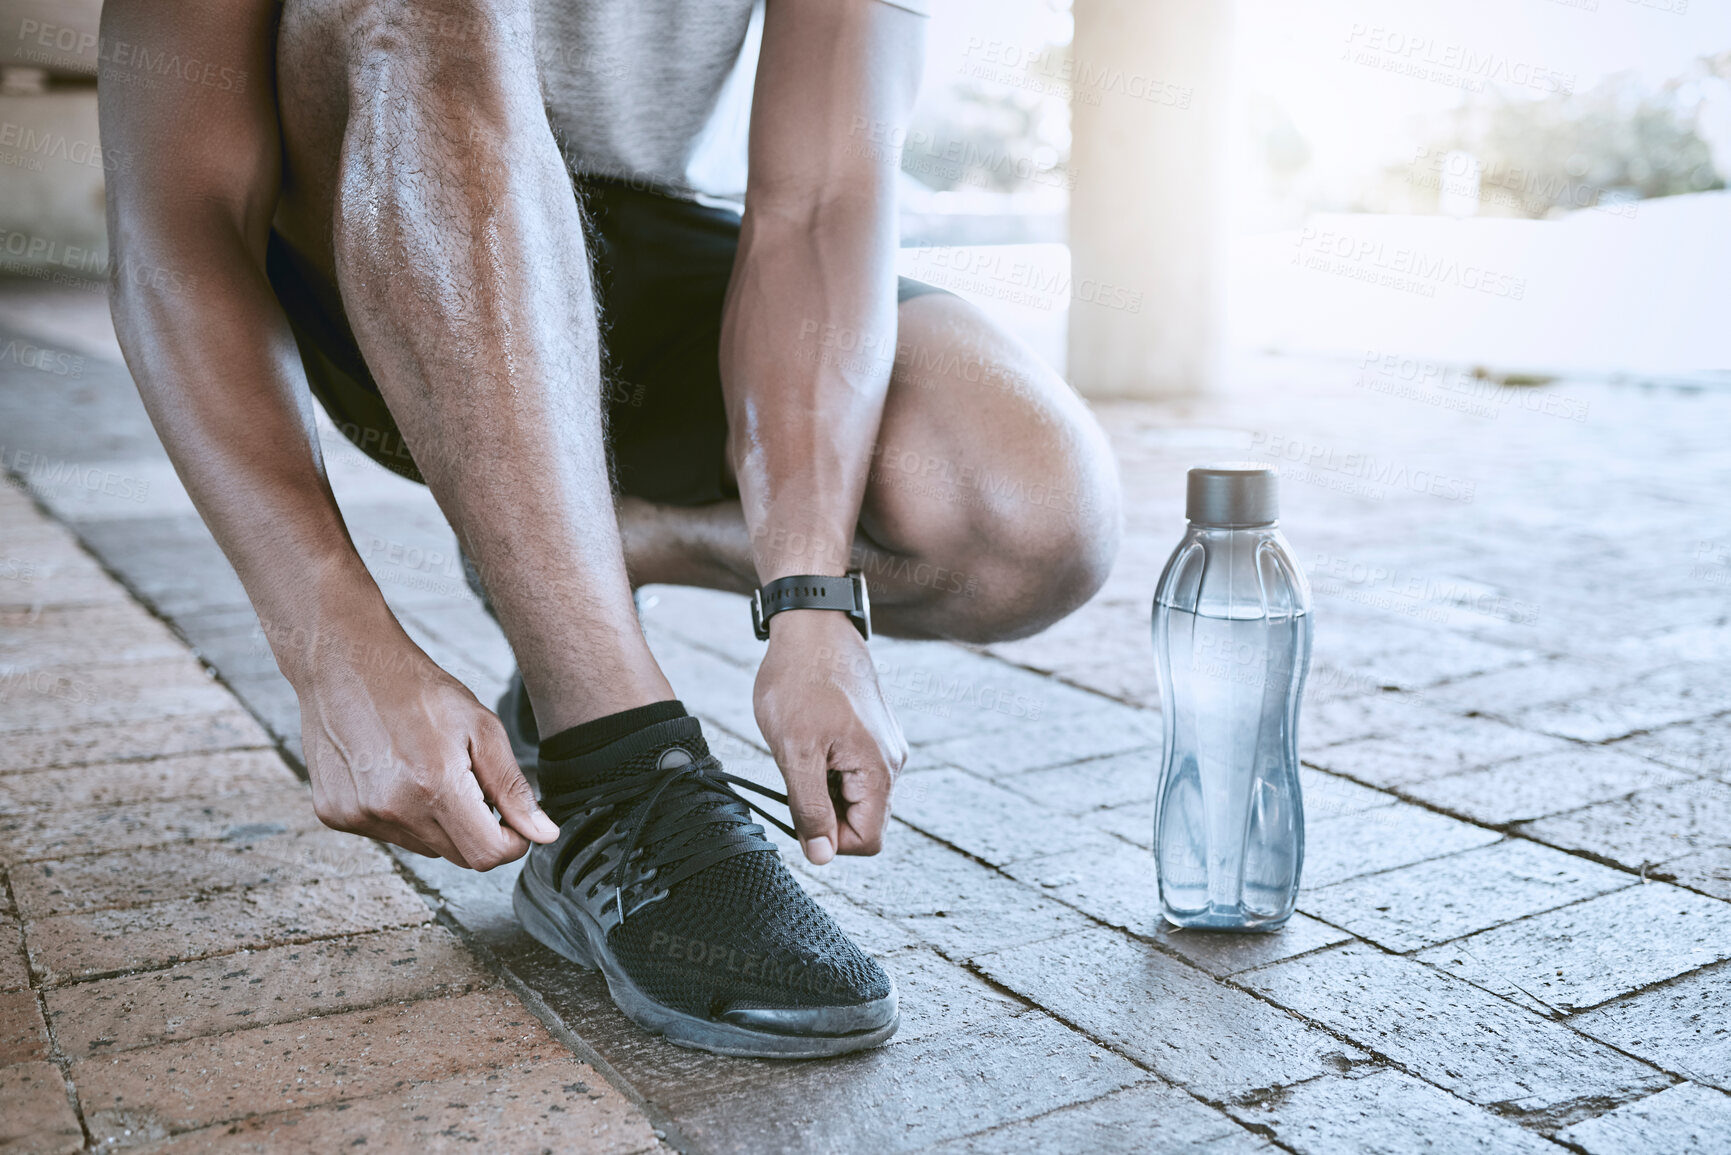 Buy stock photo Shoes, water bottle and hand of runner for motivation and in fitness training in city street. Start workout exercise for sport run on road in town. Running athlete foot prepare for wellness and sport